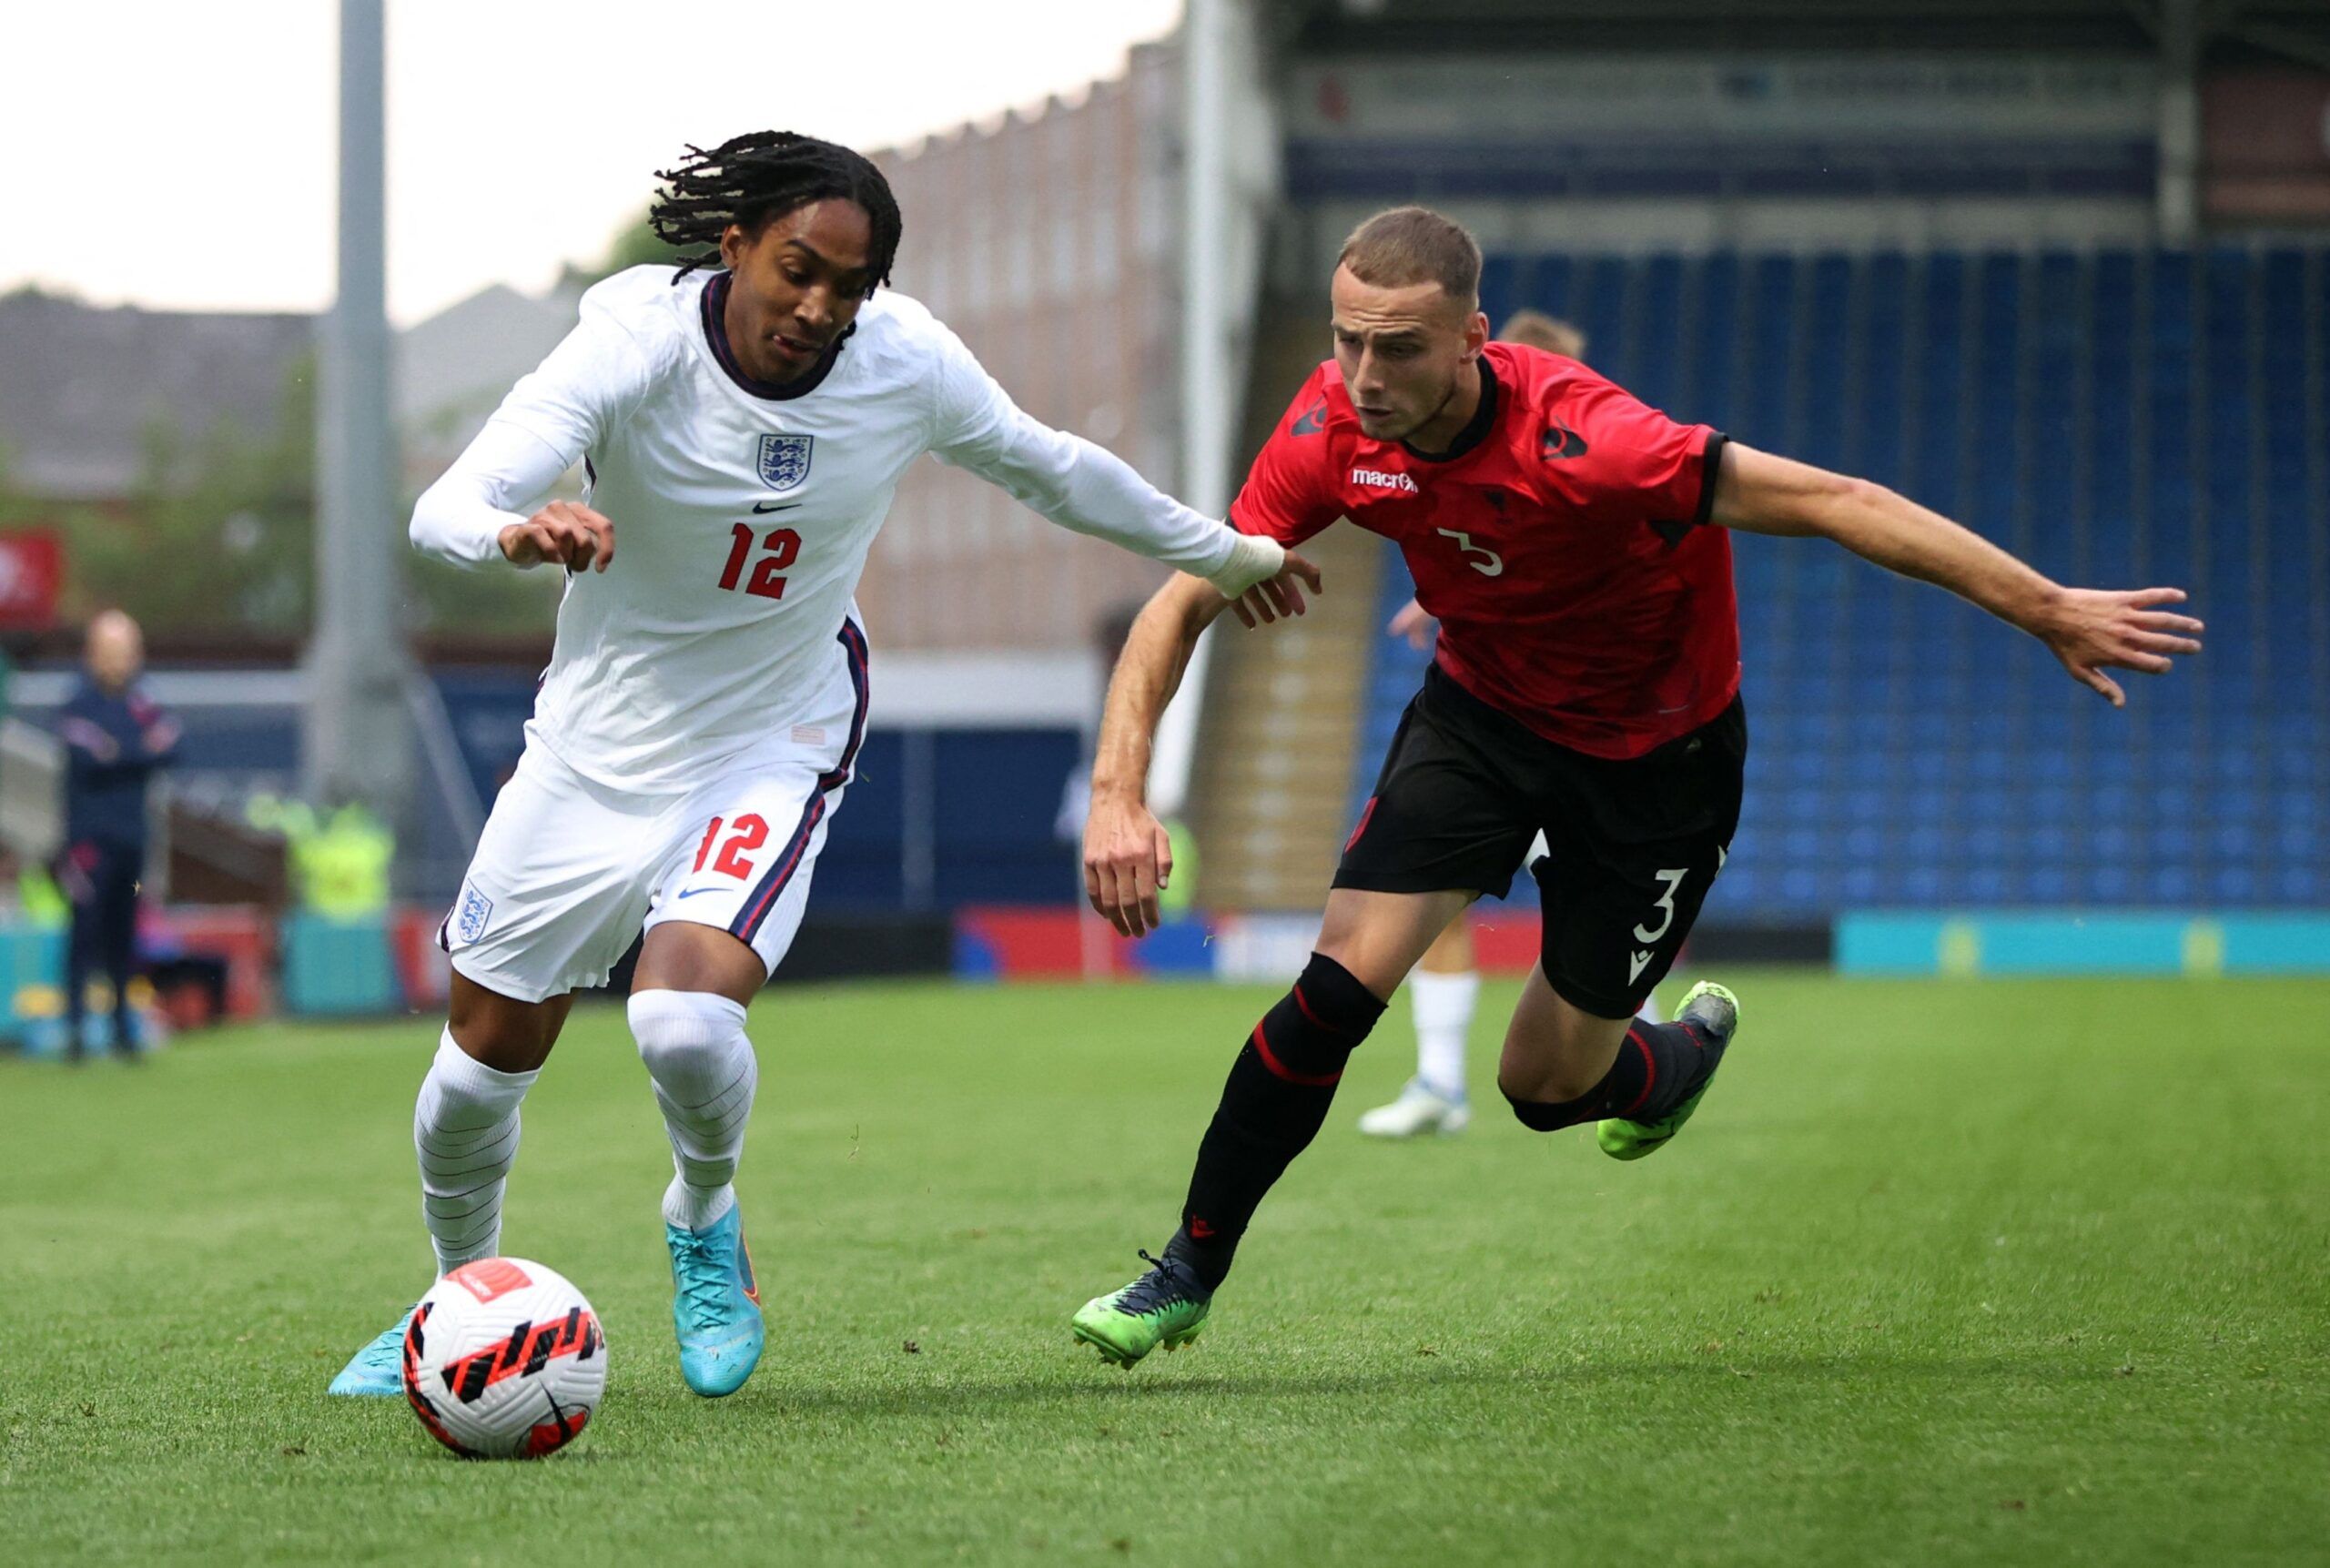 Soccer Football - European Under-21 Championship Qualifying - Group G - England v Albania - Technique Stadium, Chesterfield, Britain - June 7, 2022 England's Djed Spence in action with Albania's Mario Mitaj Action Images via Reuters/Molly Darlington